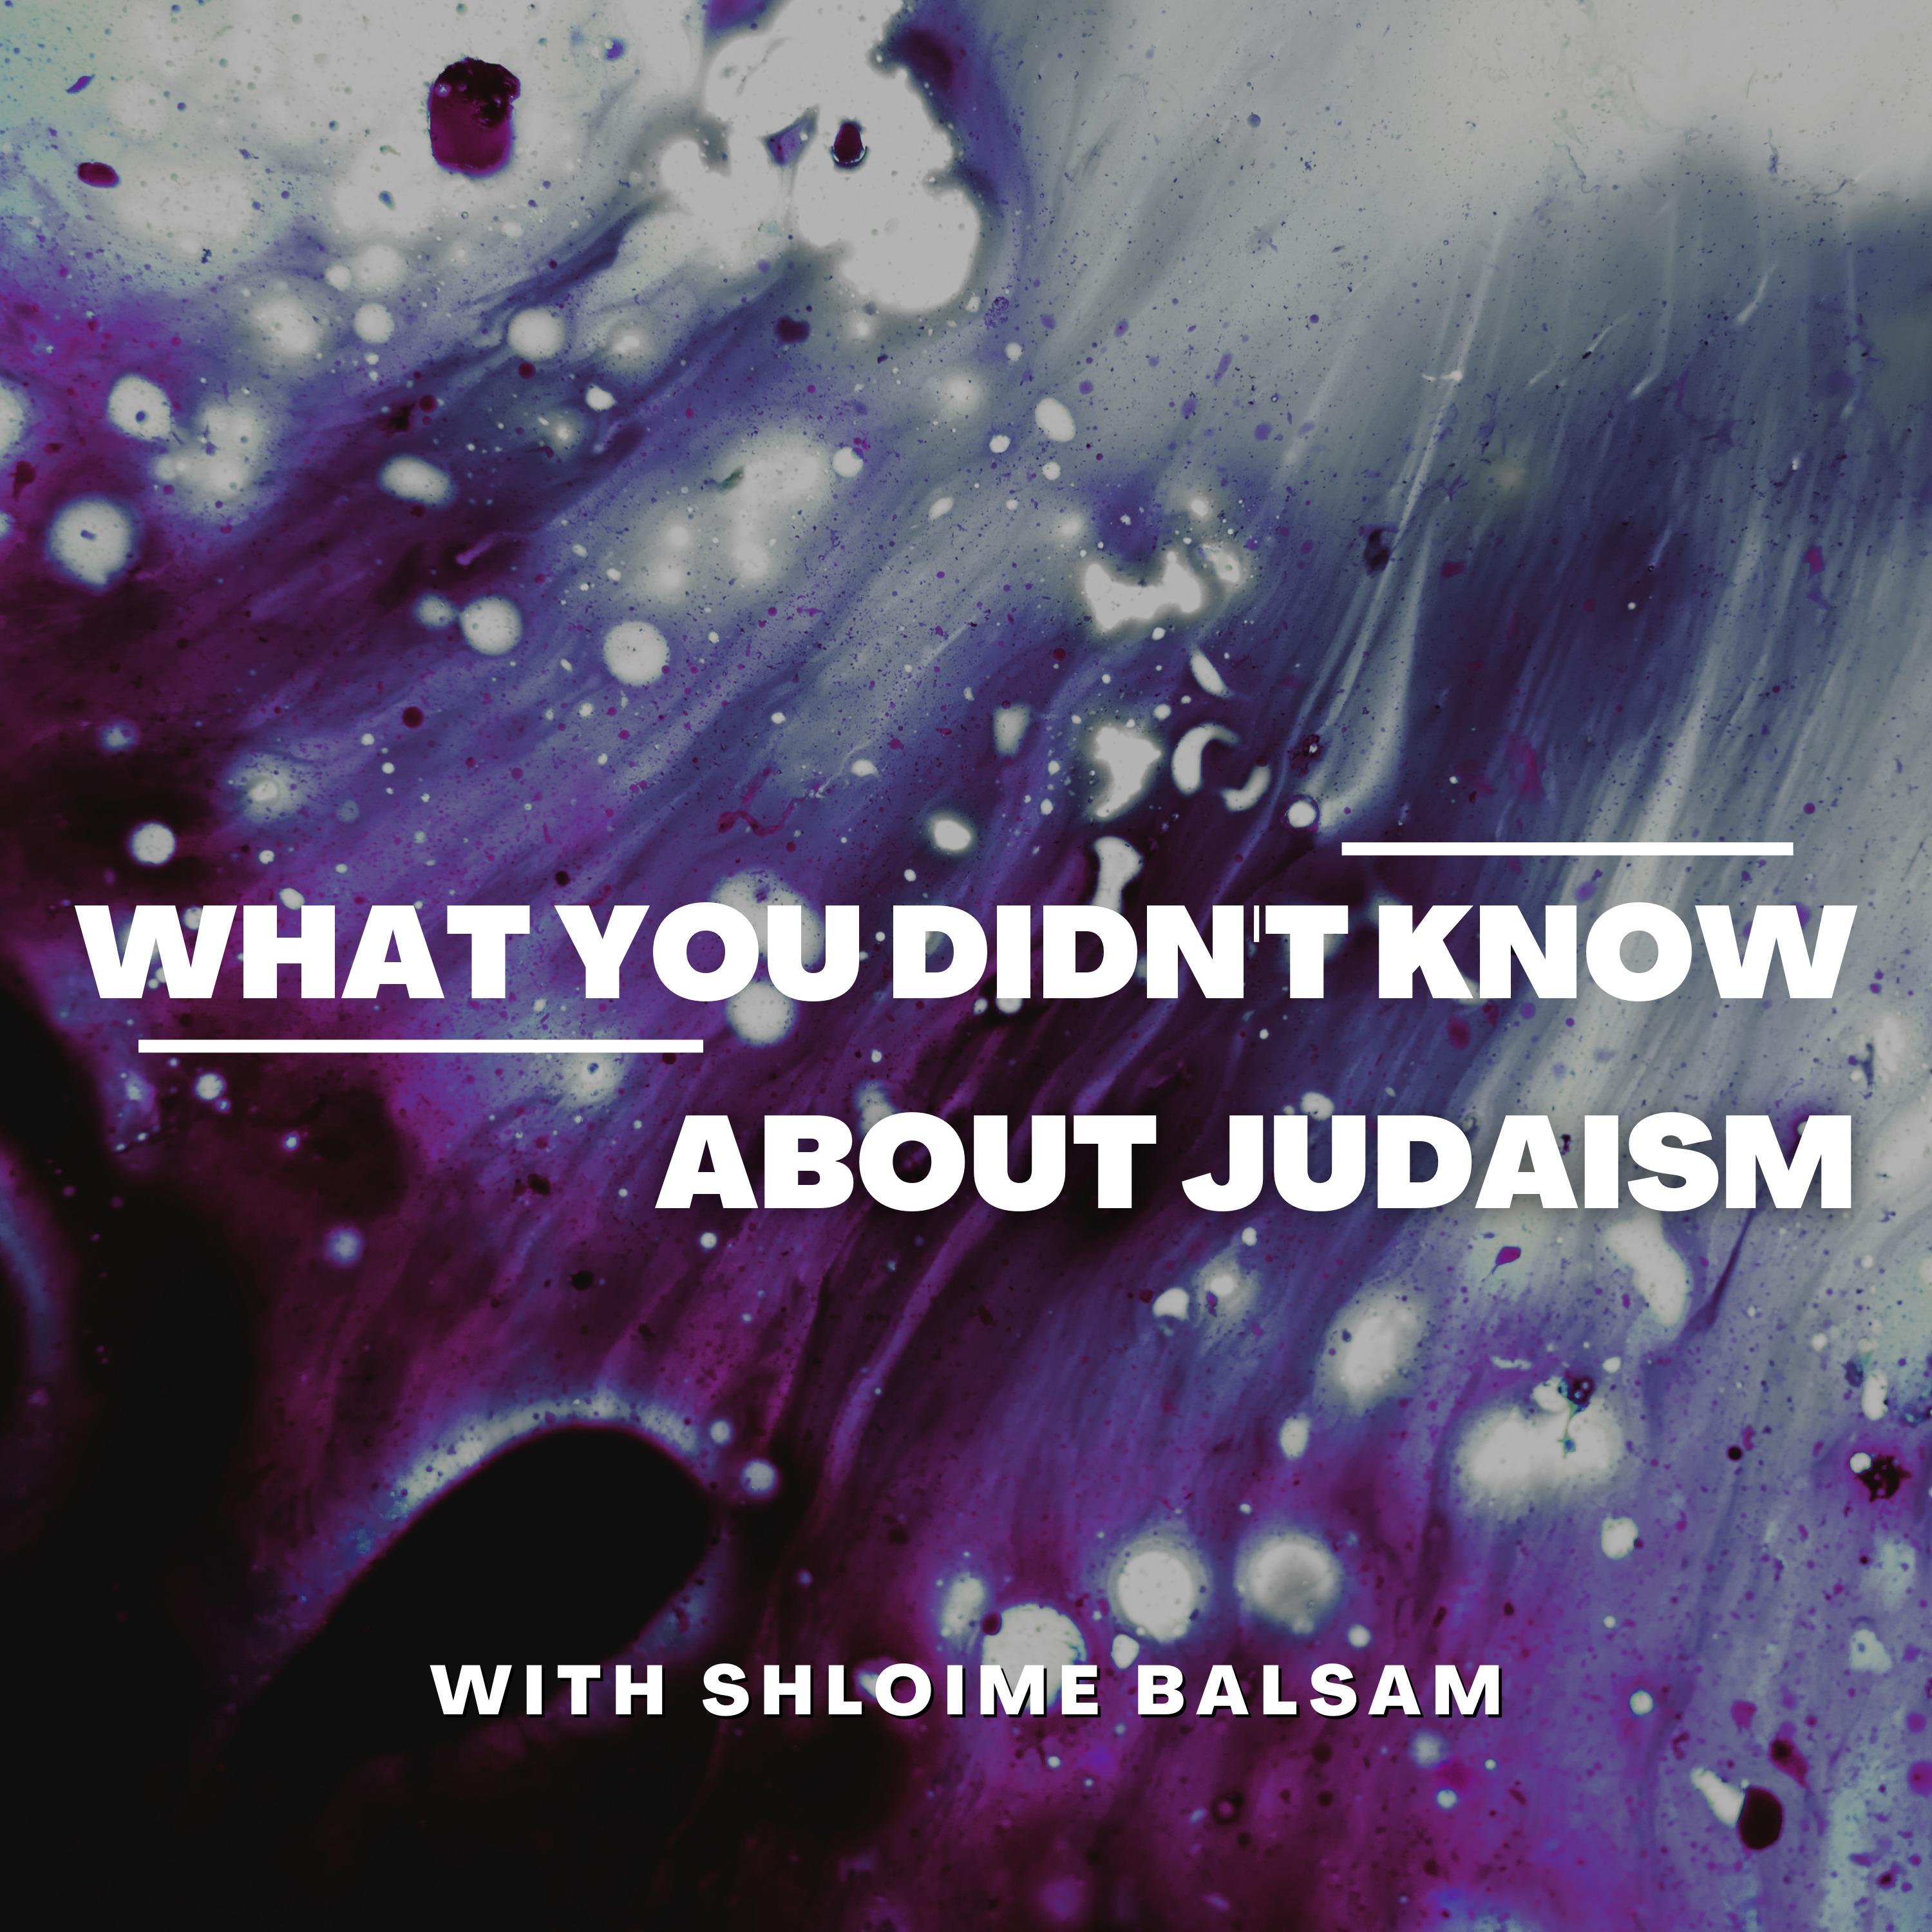 What You Didn't Know About Judaism